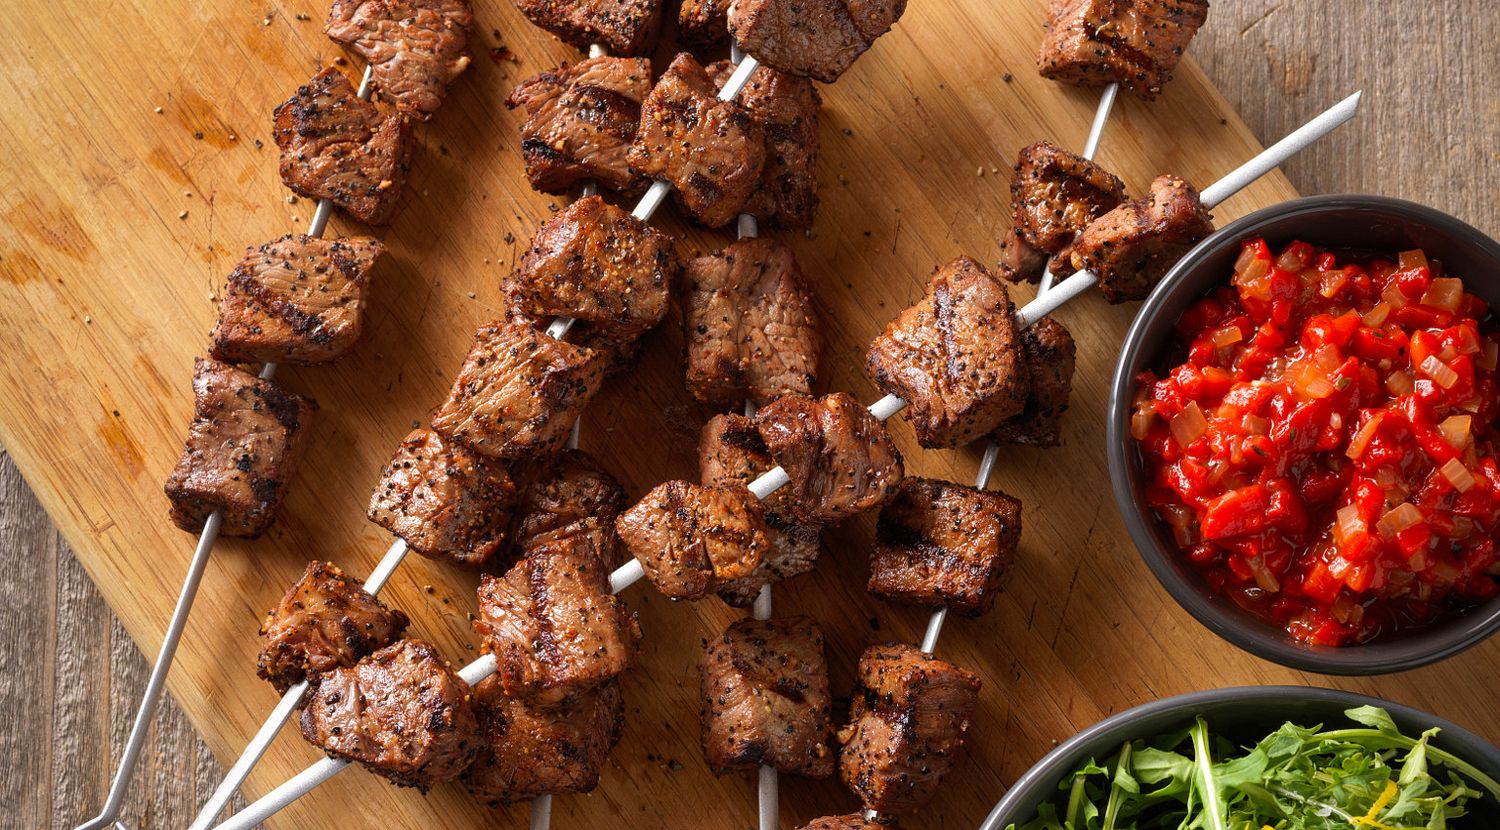 Beef Sirloin Kabobs with Roasted Red Pepper Dipping Sauce